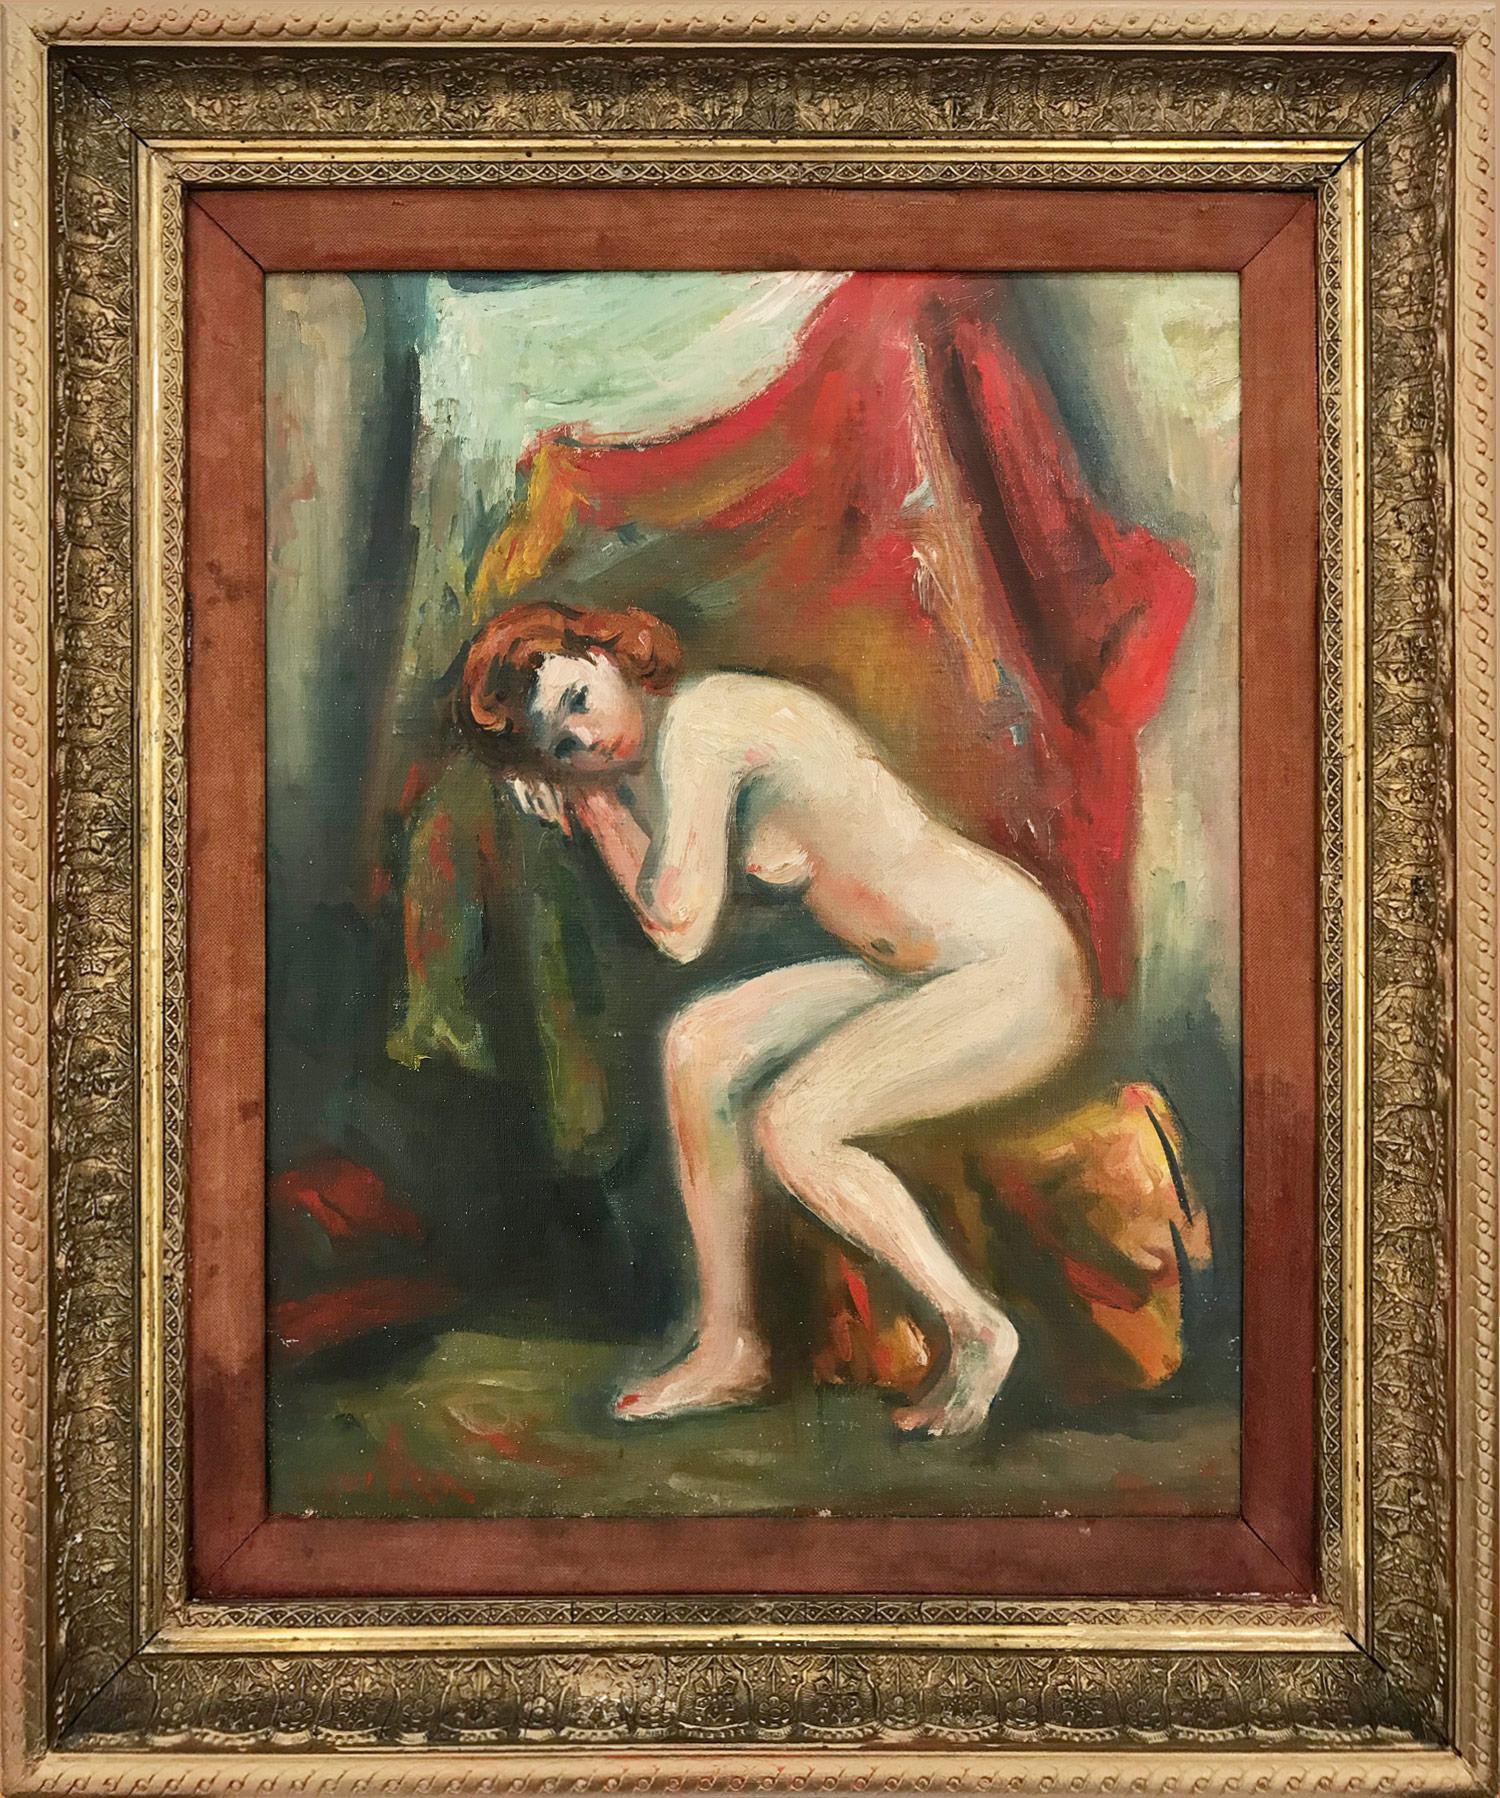 Jacques Zucker Interior Painting - "Reclining Nude" Impressionist Portrait of Nude Woman Oil Painting on Canvas